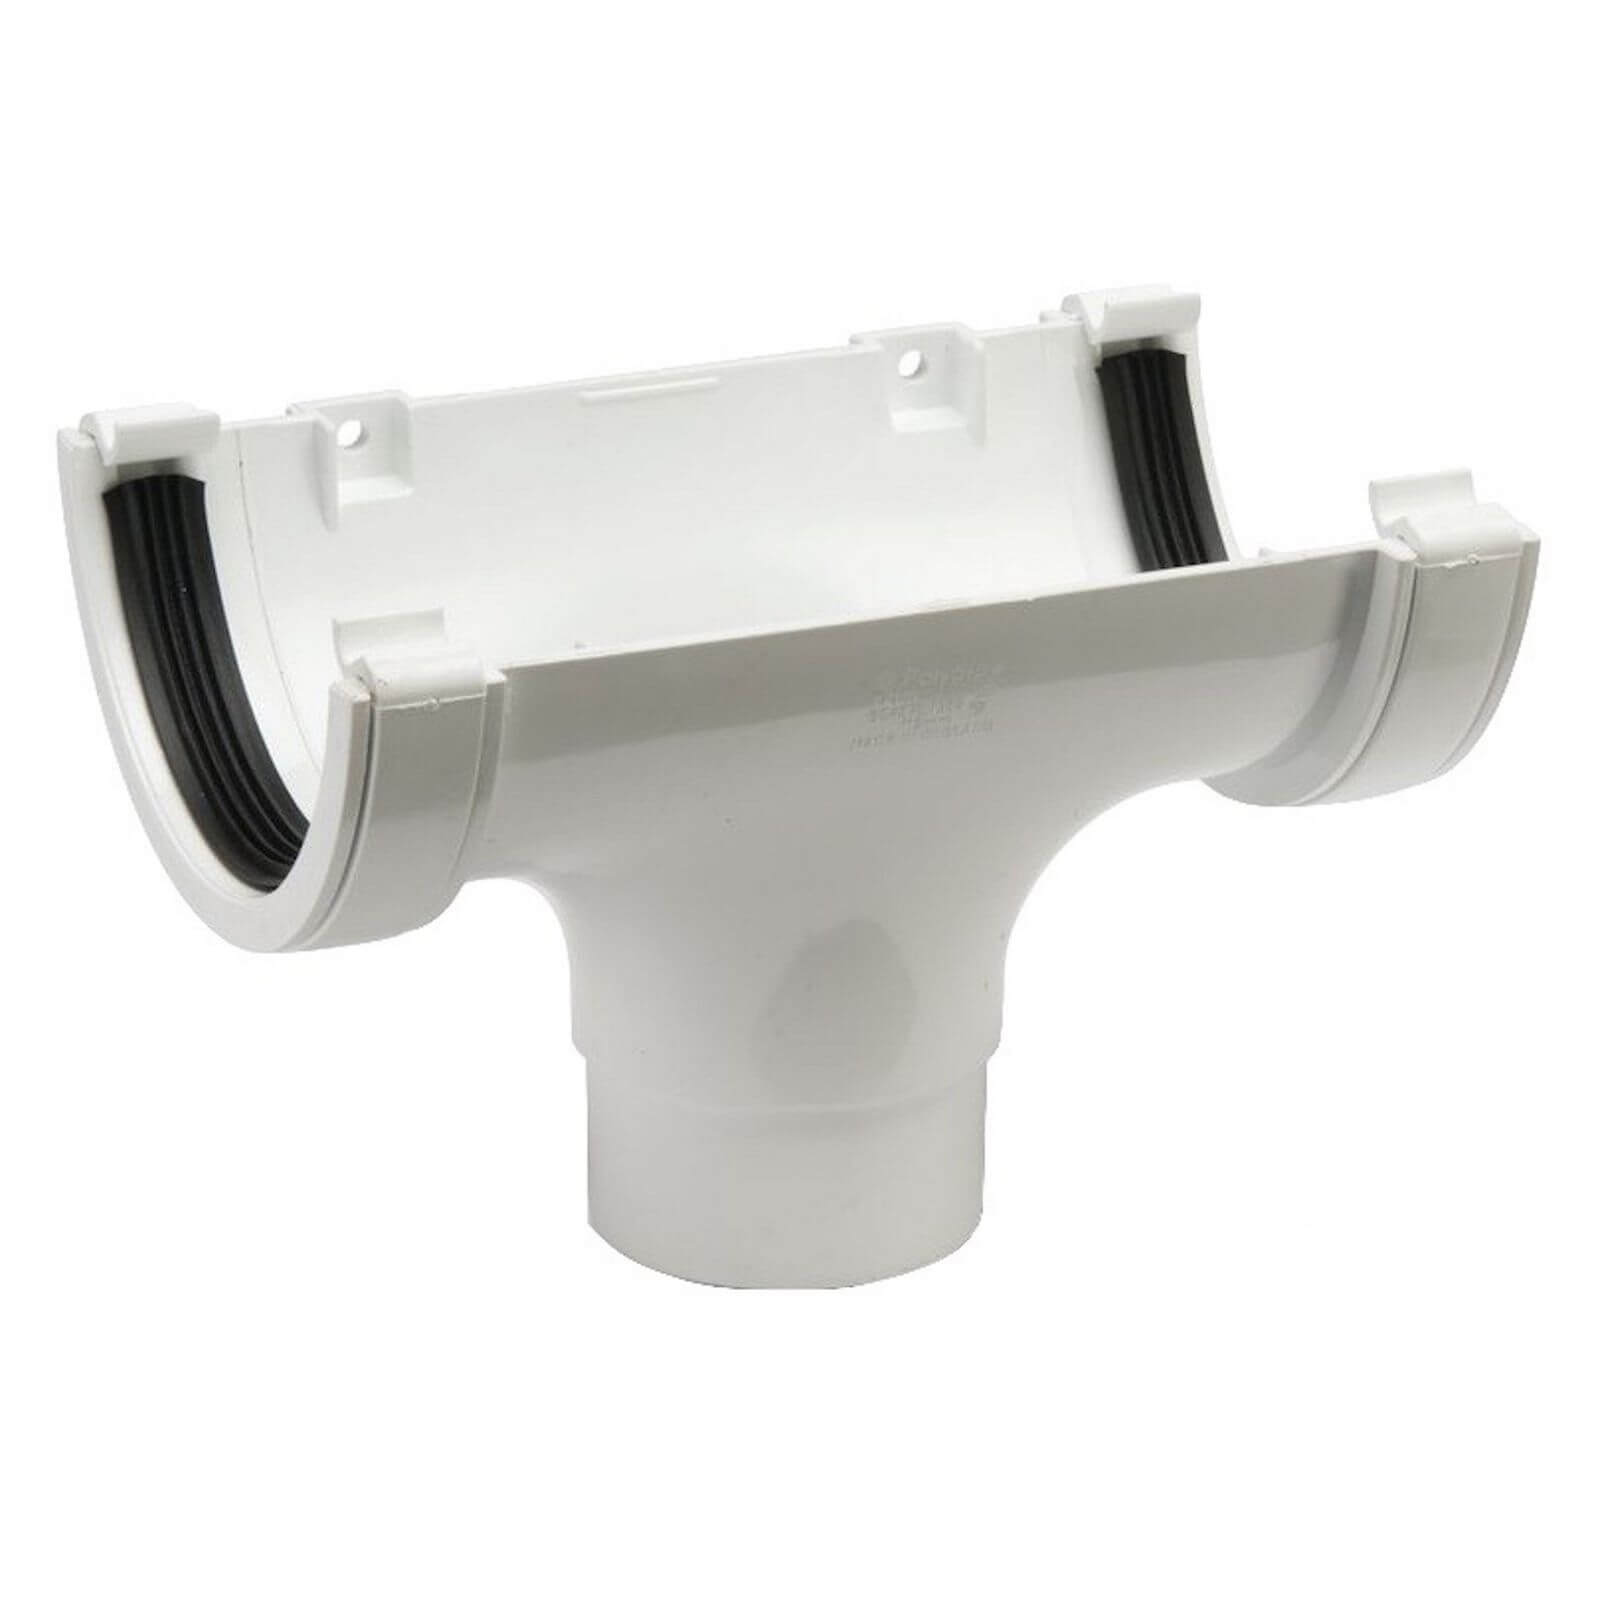 Polypipe Half Round Gutter Running Outlet - 112mm - White